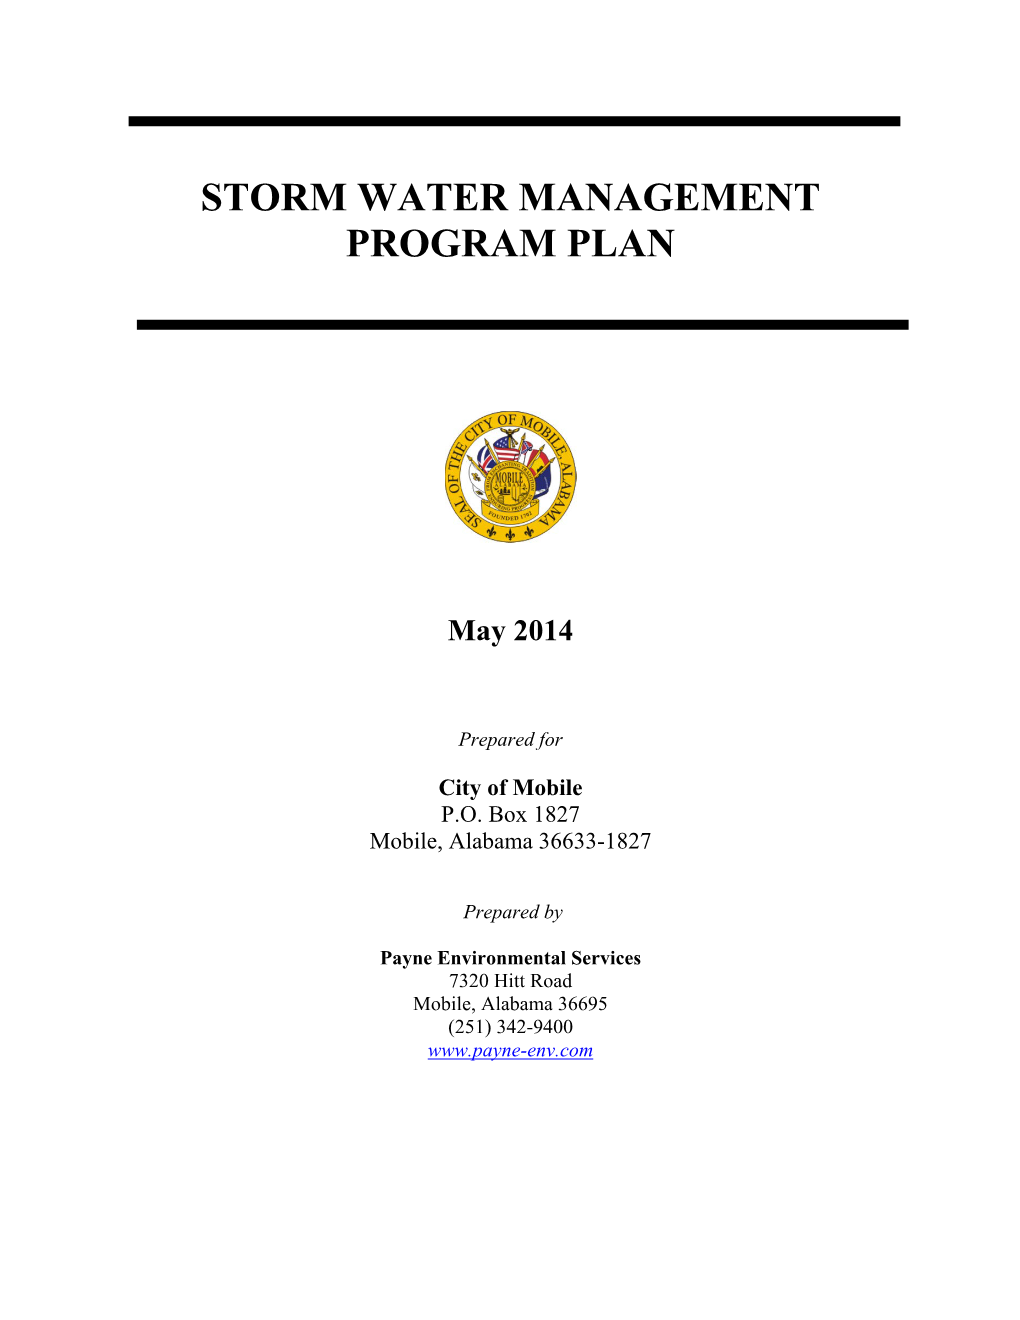 City of Mobile Stormwater Management Plan